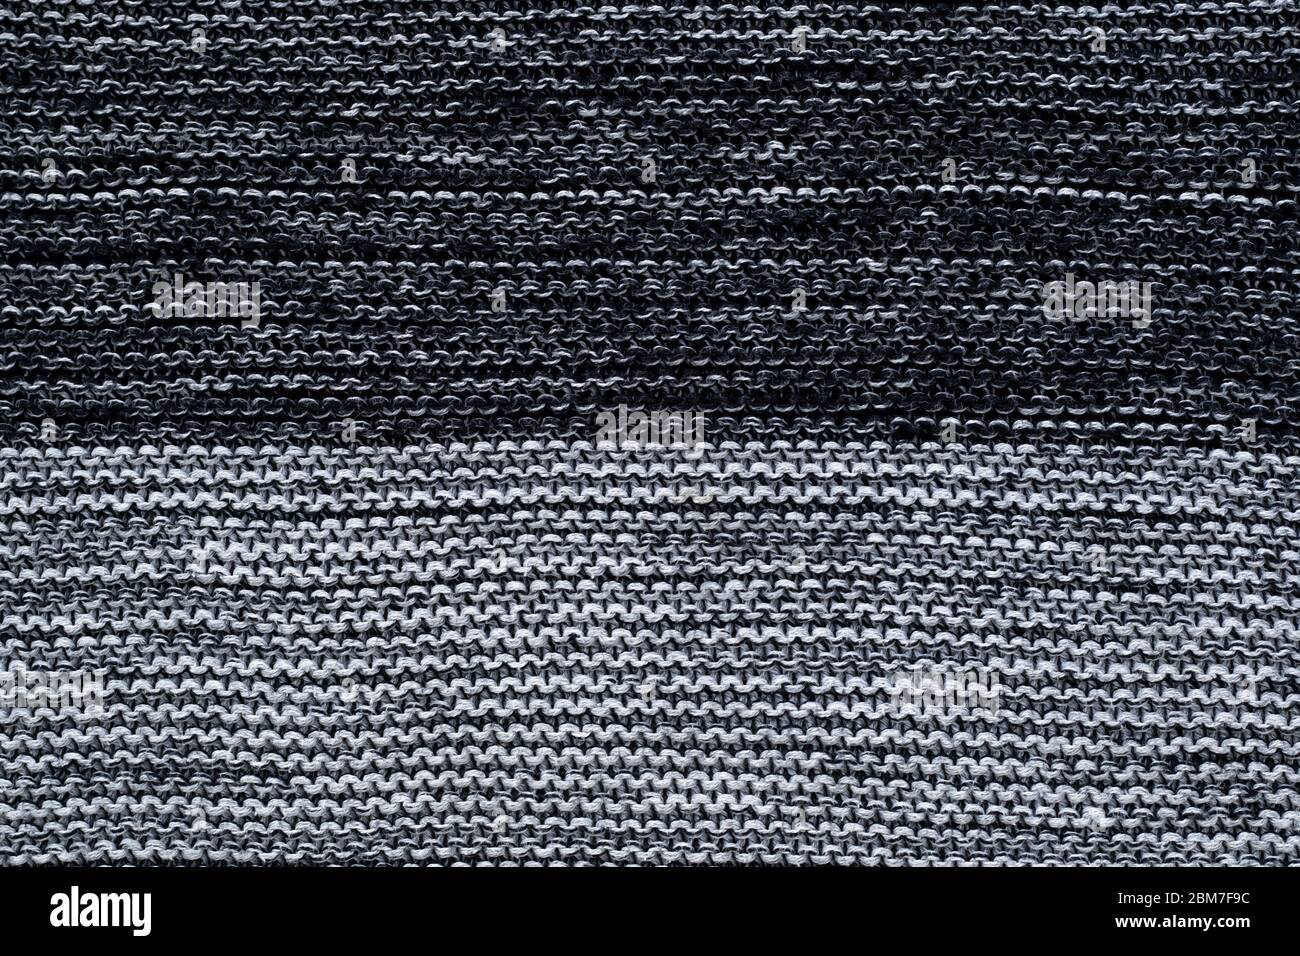 Black and white knitted texture, wallpaper. Abstract knitwear background. Gray jersey Stock Photo